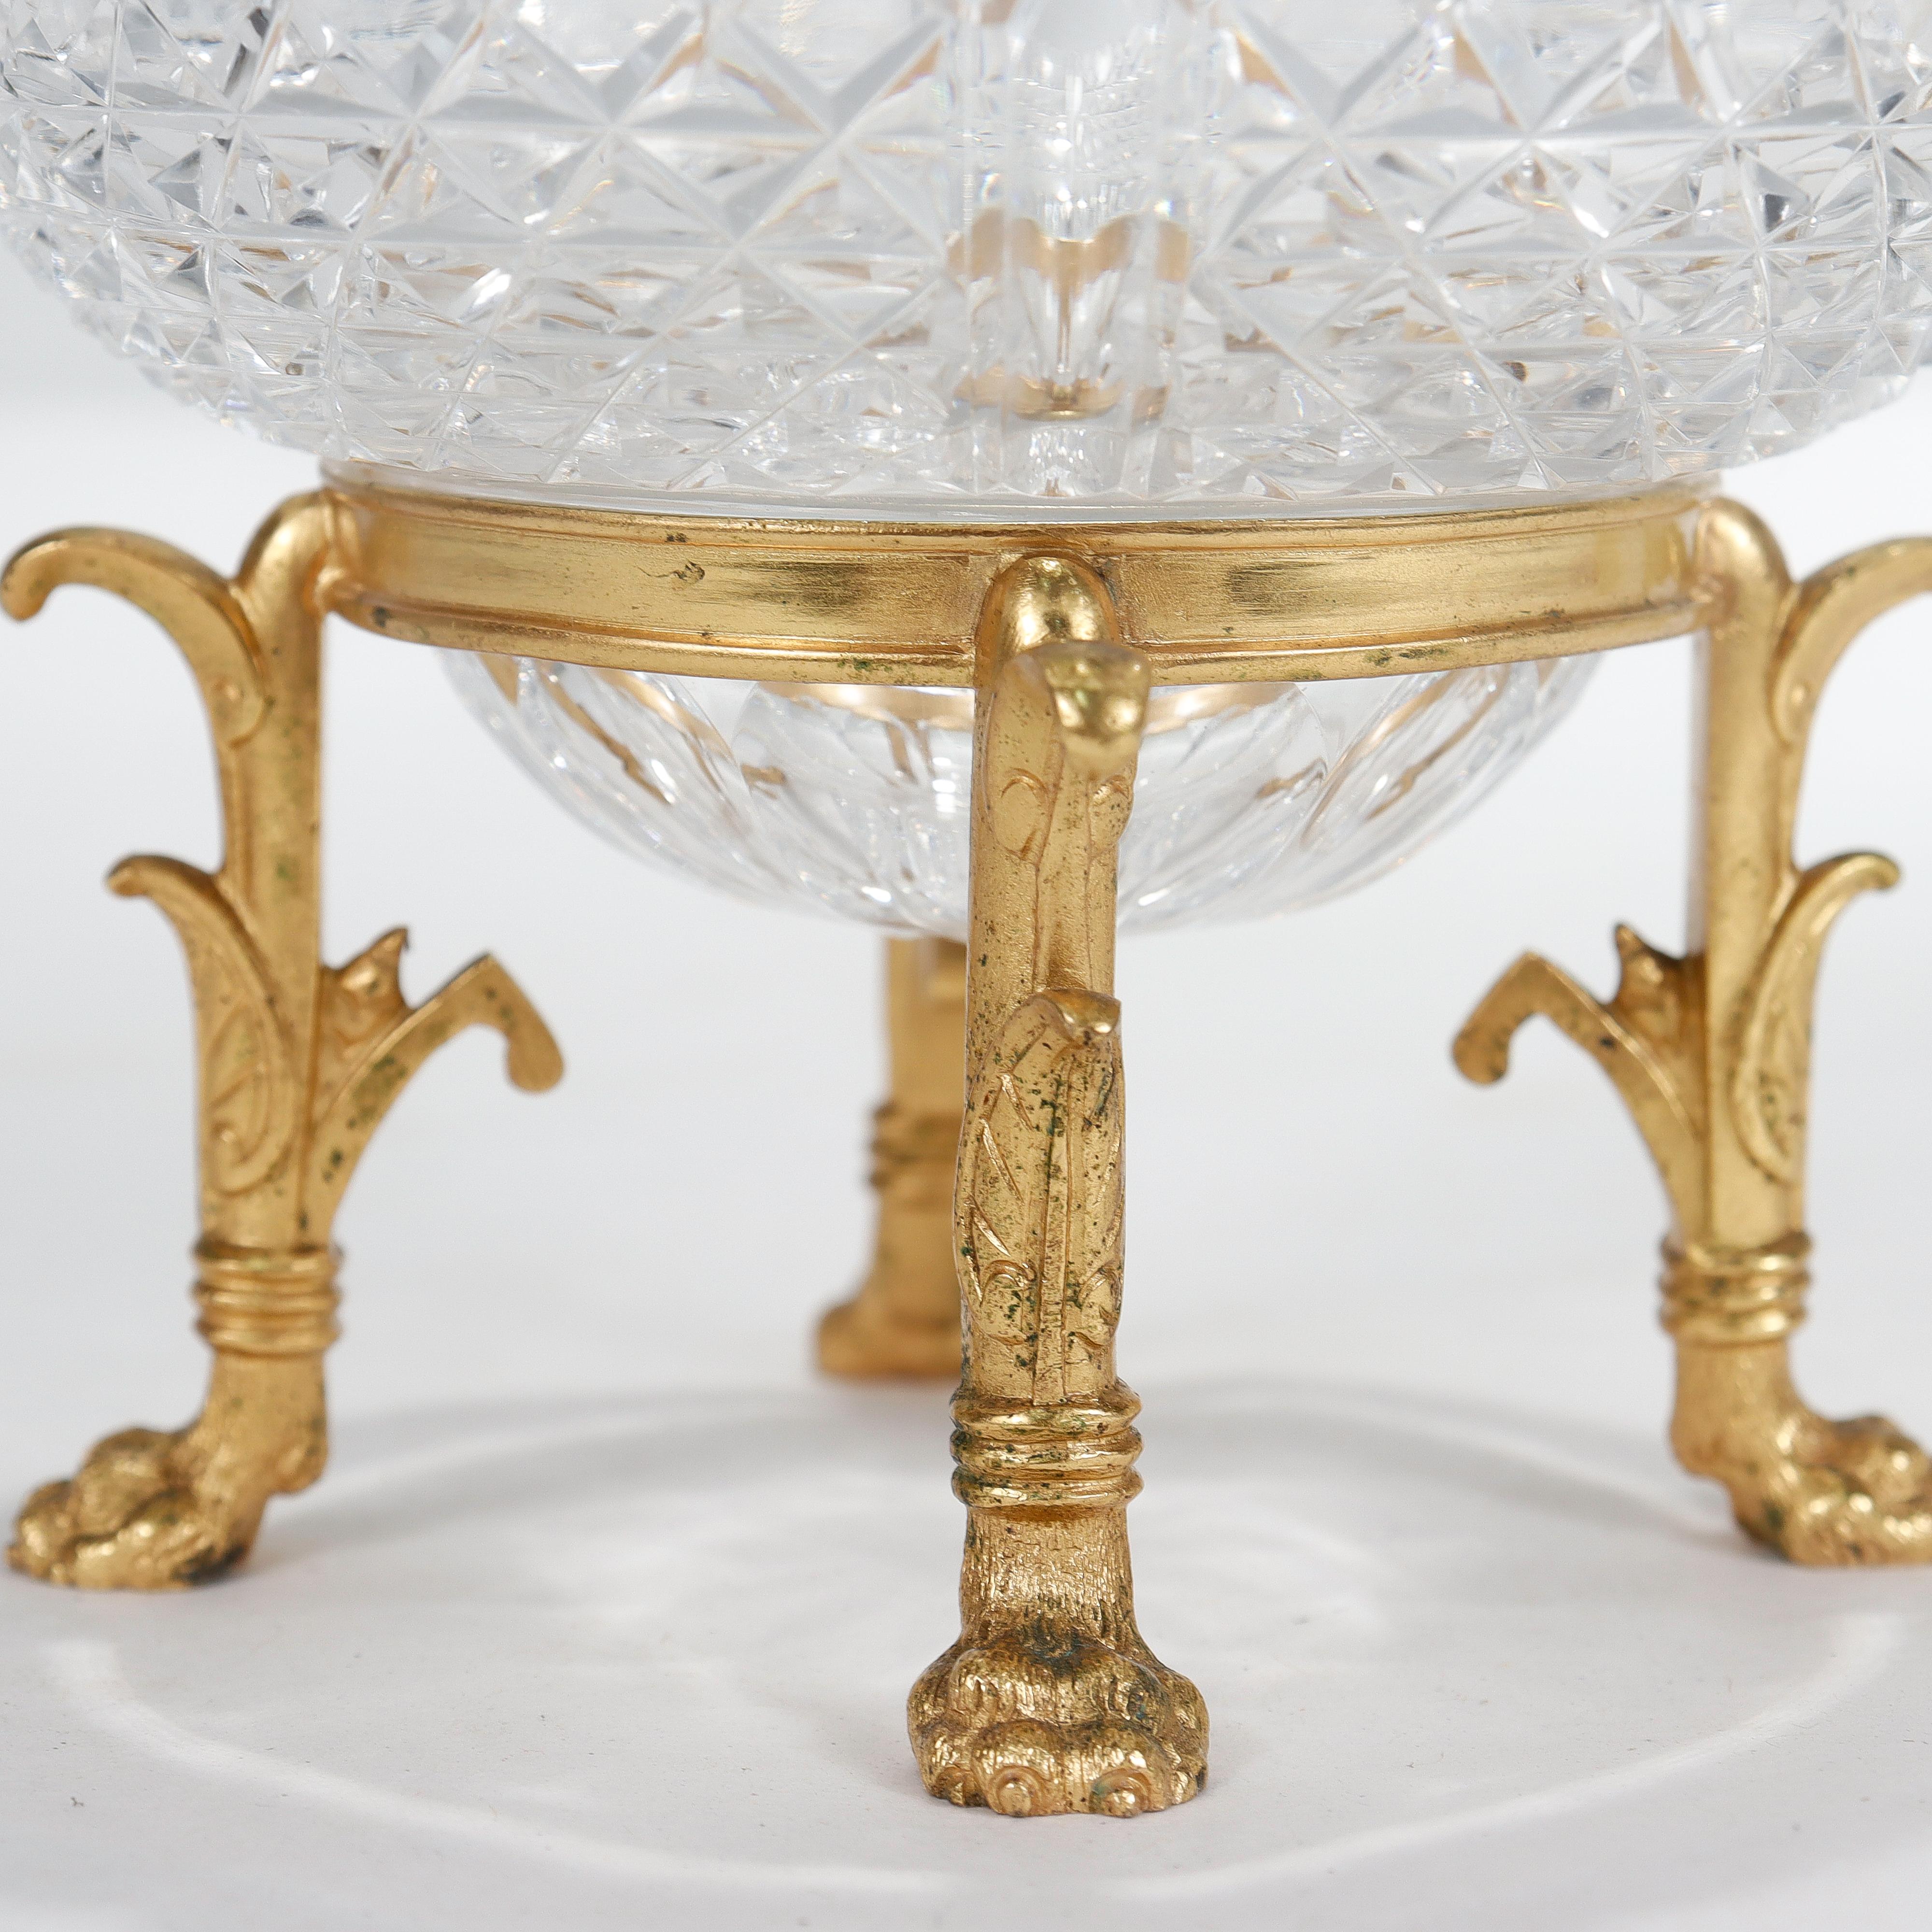 Pair of Gilt Bronze & Cut Glass Footed Bowls Attributed to F. & C. Osler 11